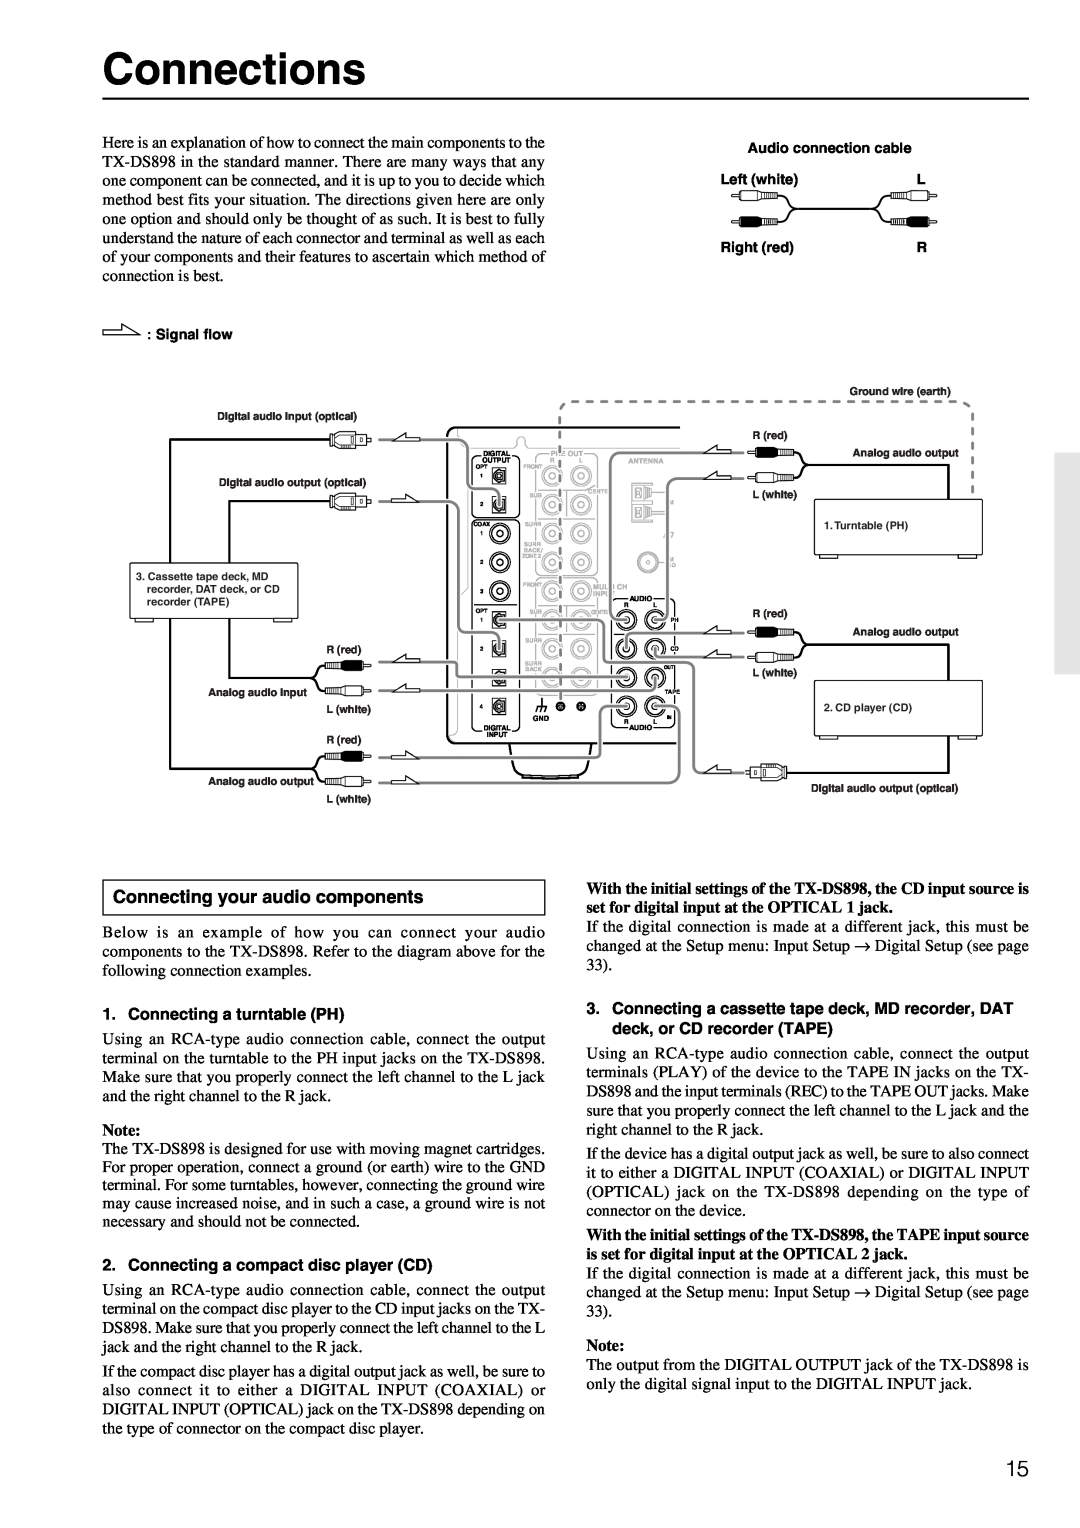 Onkyo TX-DS898 instruction manual Connections, Connecting your audio components 